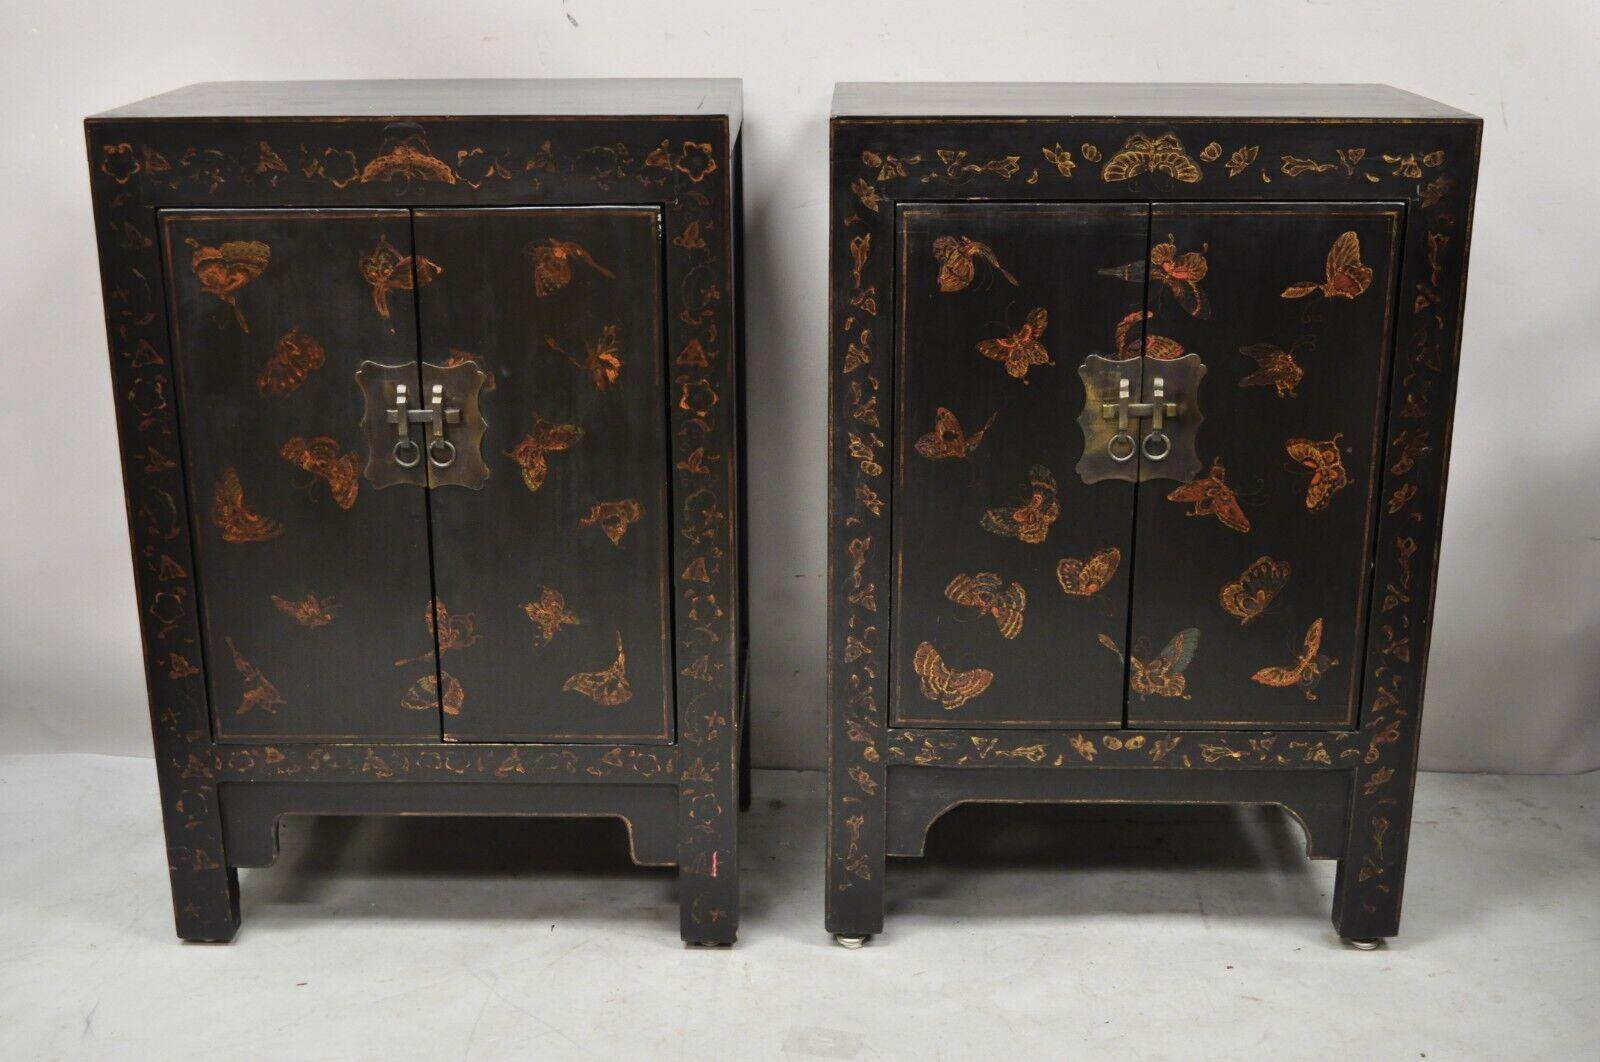 Vintage black lacquer hand painted butterfly chinese oriental cabinets - a pair. Item features hand painted butterflies, black lacquer finish, 2 swing doors, solid brass hardware, great style and form. Circa mid to late 20th century. Measurements: